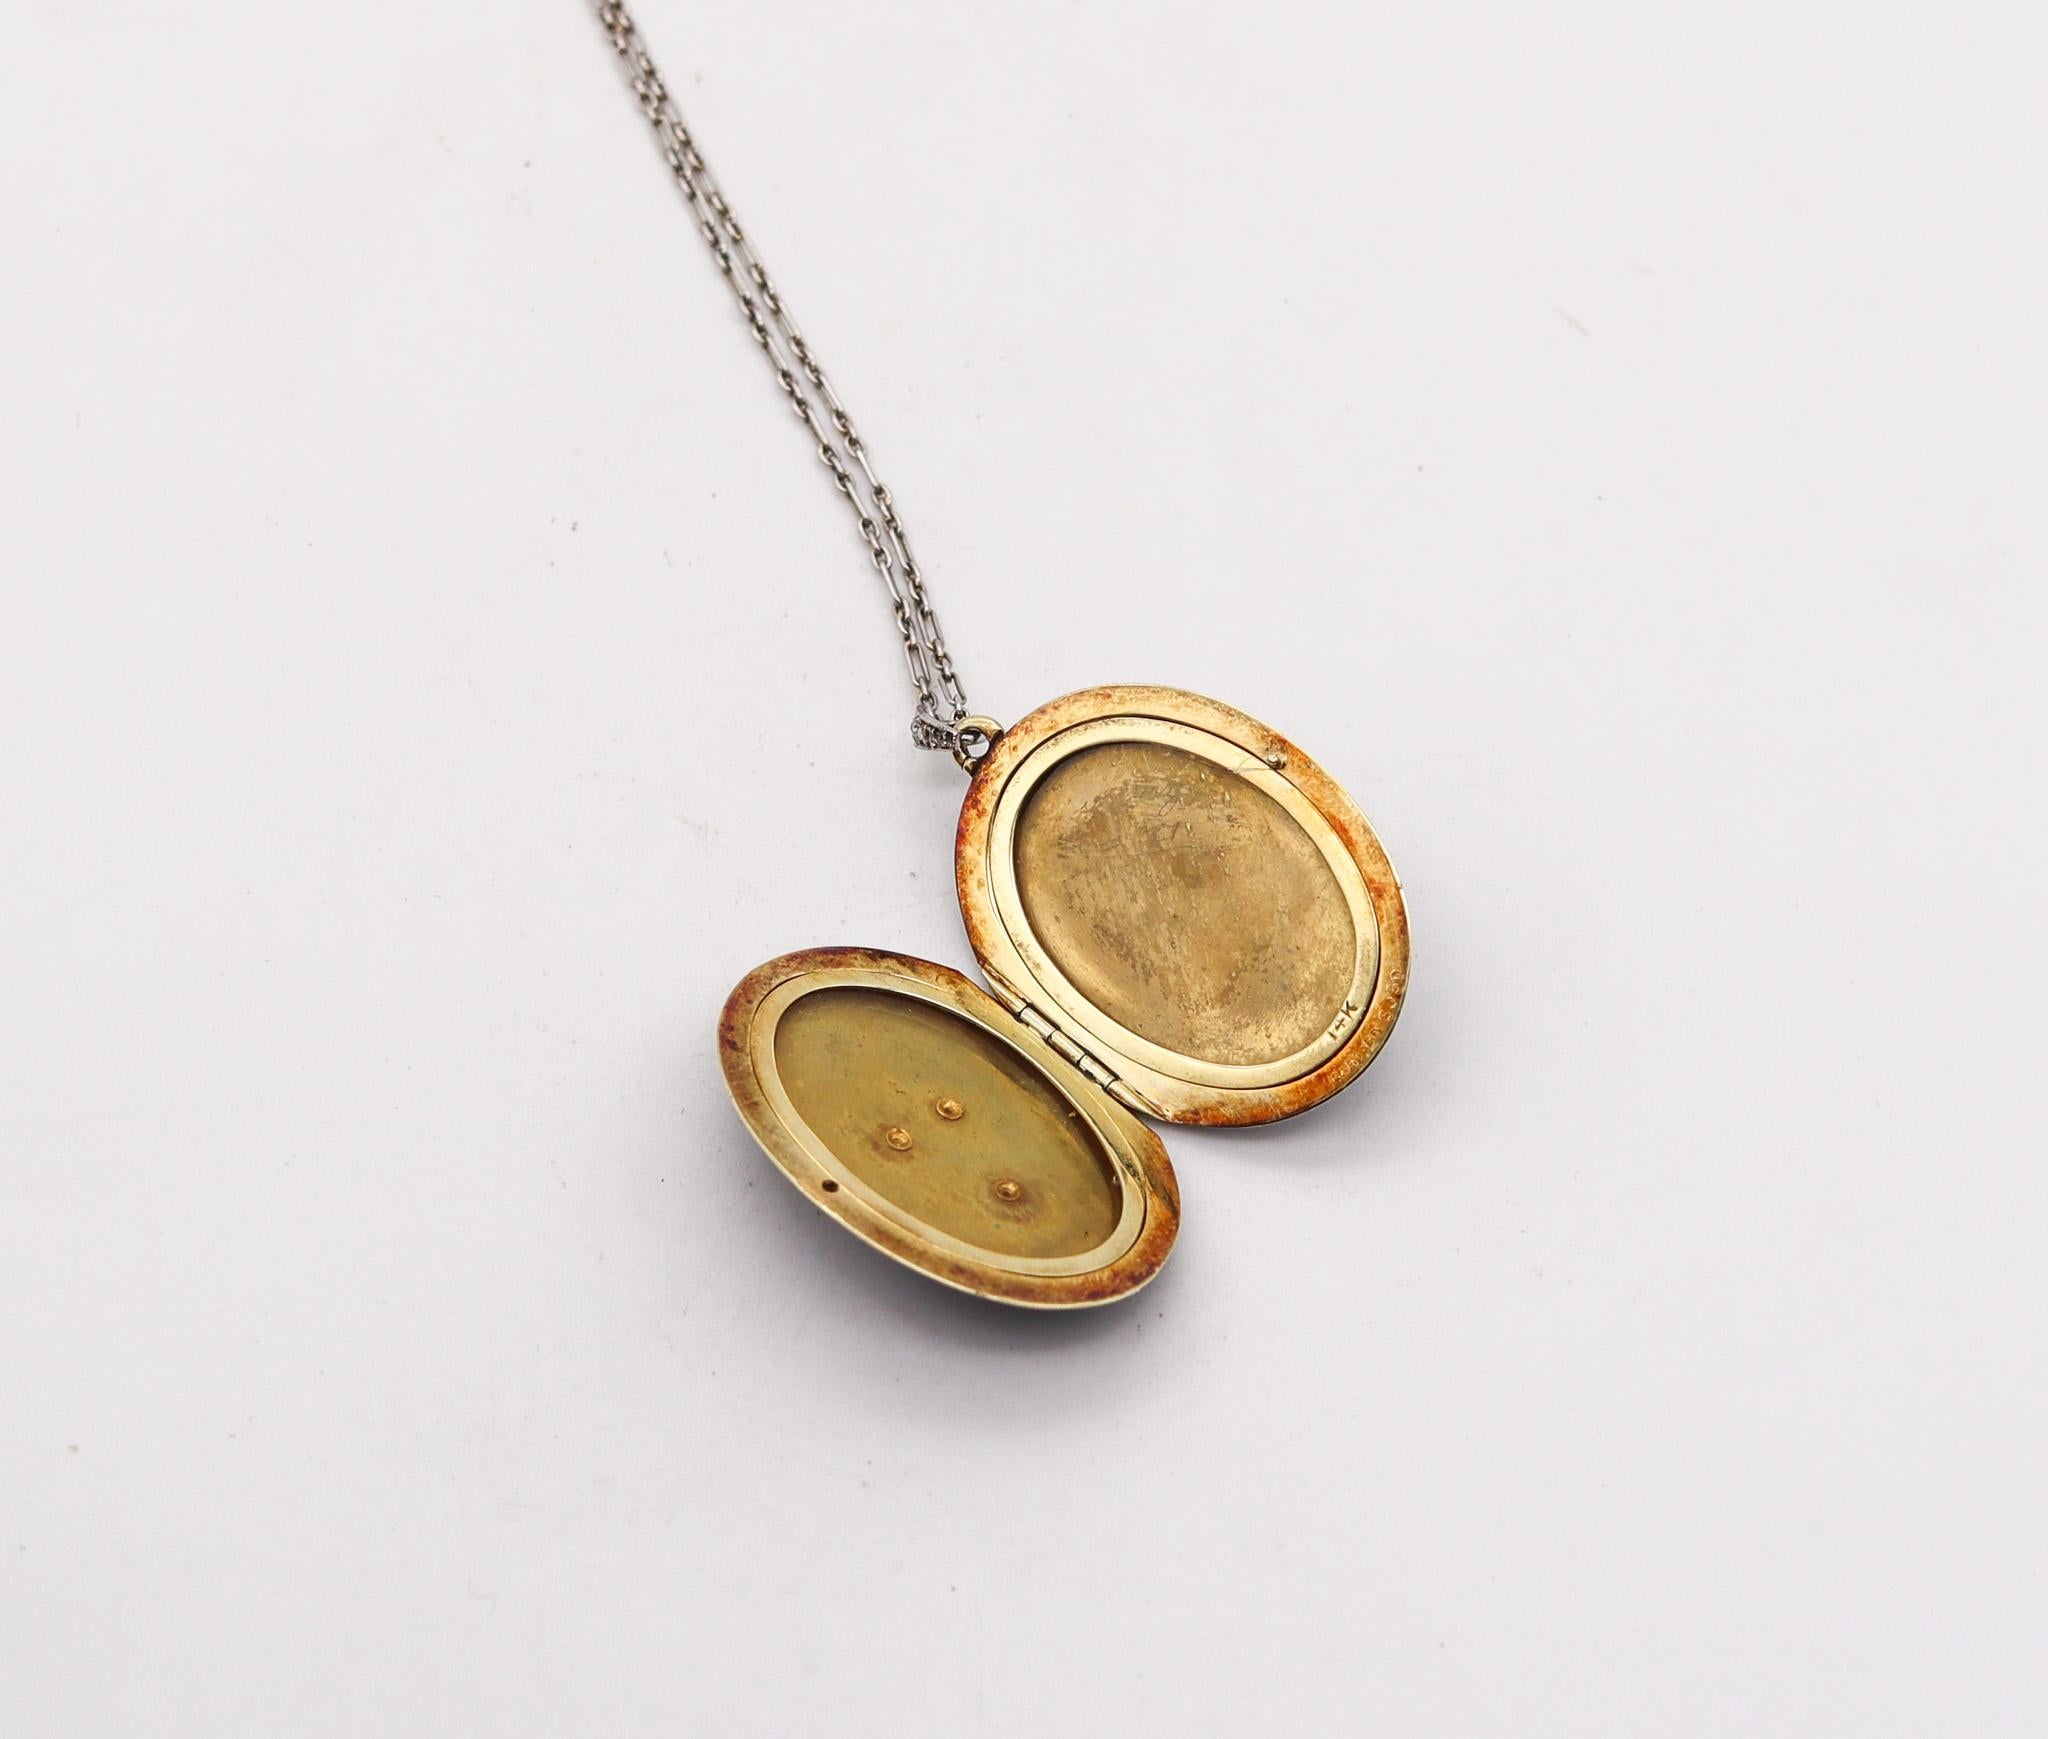 Cartier 1900 Edwardian Enameled Locket Necklace In 14Kt Gold With Rose Diamonds For Sale 3